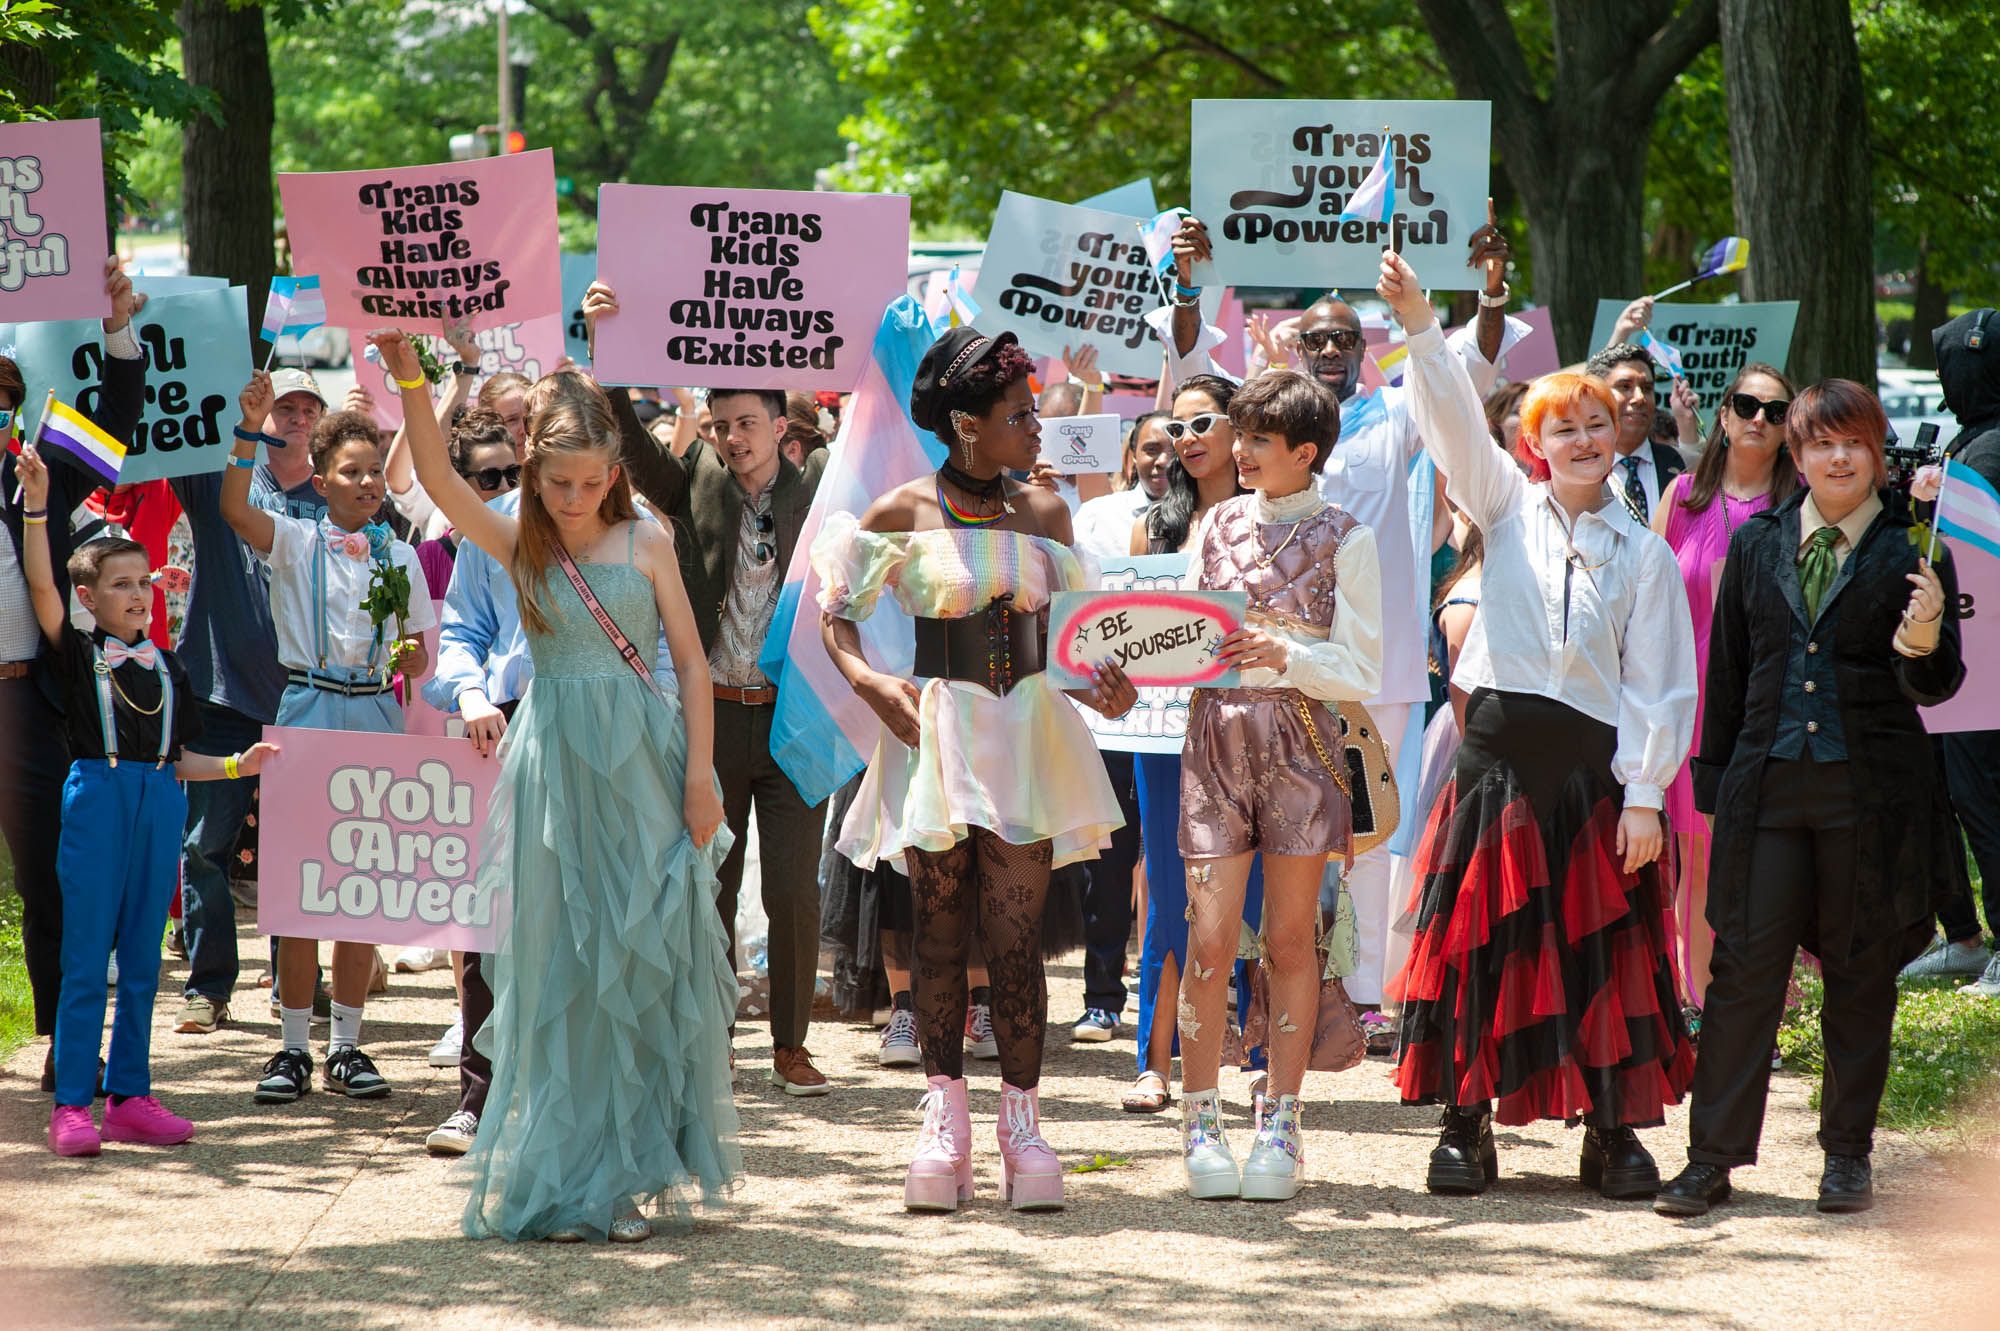 Youths march in a parade after the Trans Youth Prom in Washington D.C. on May 22, 2023.